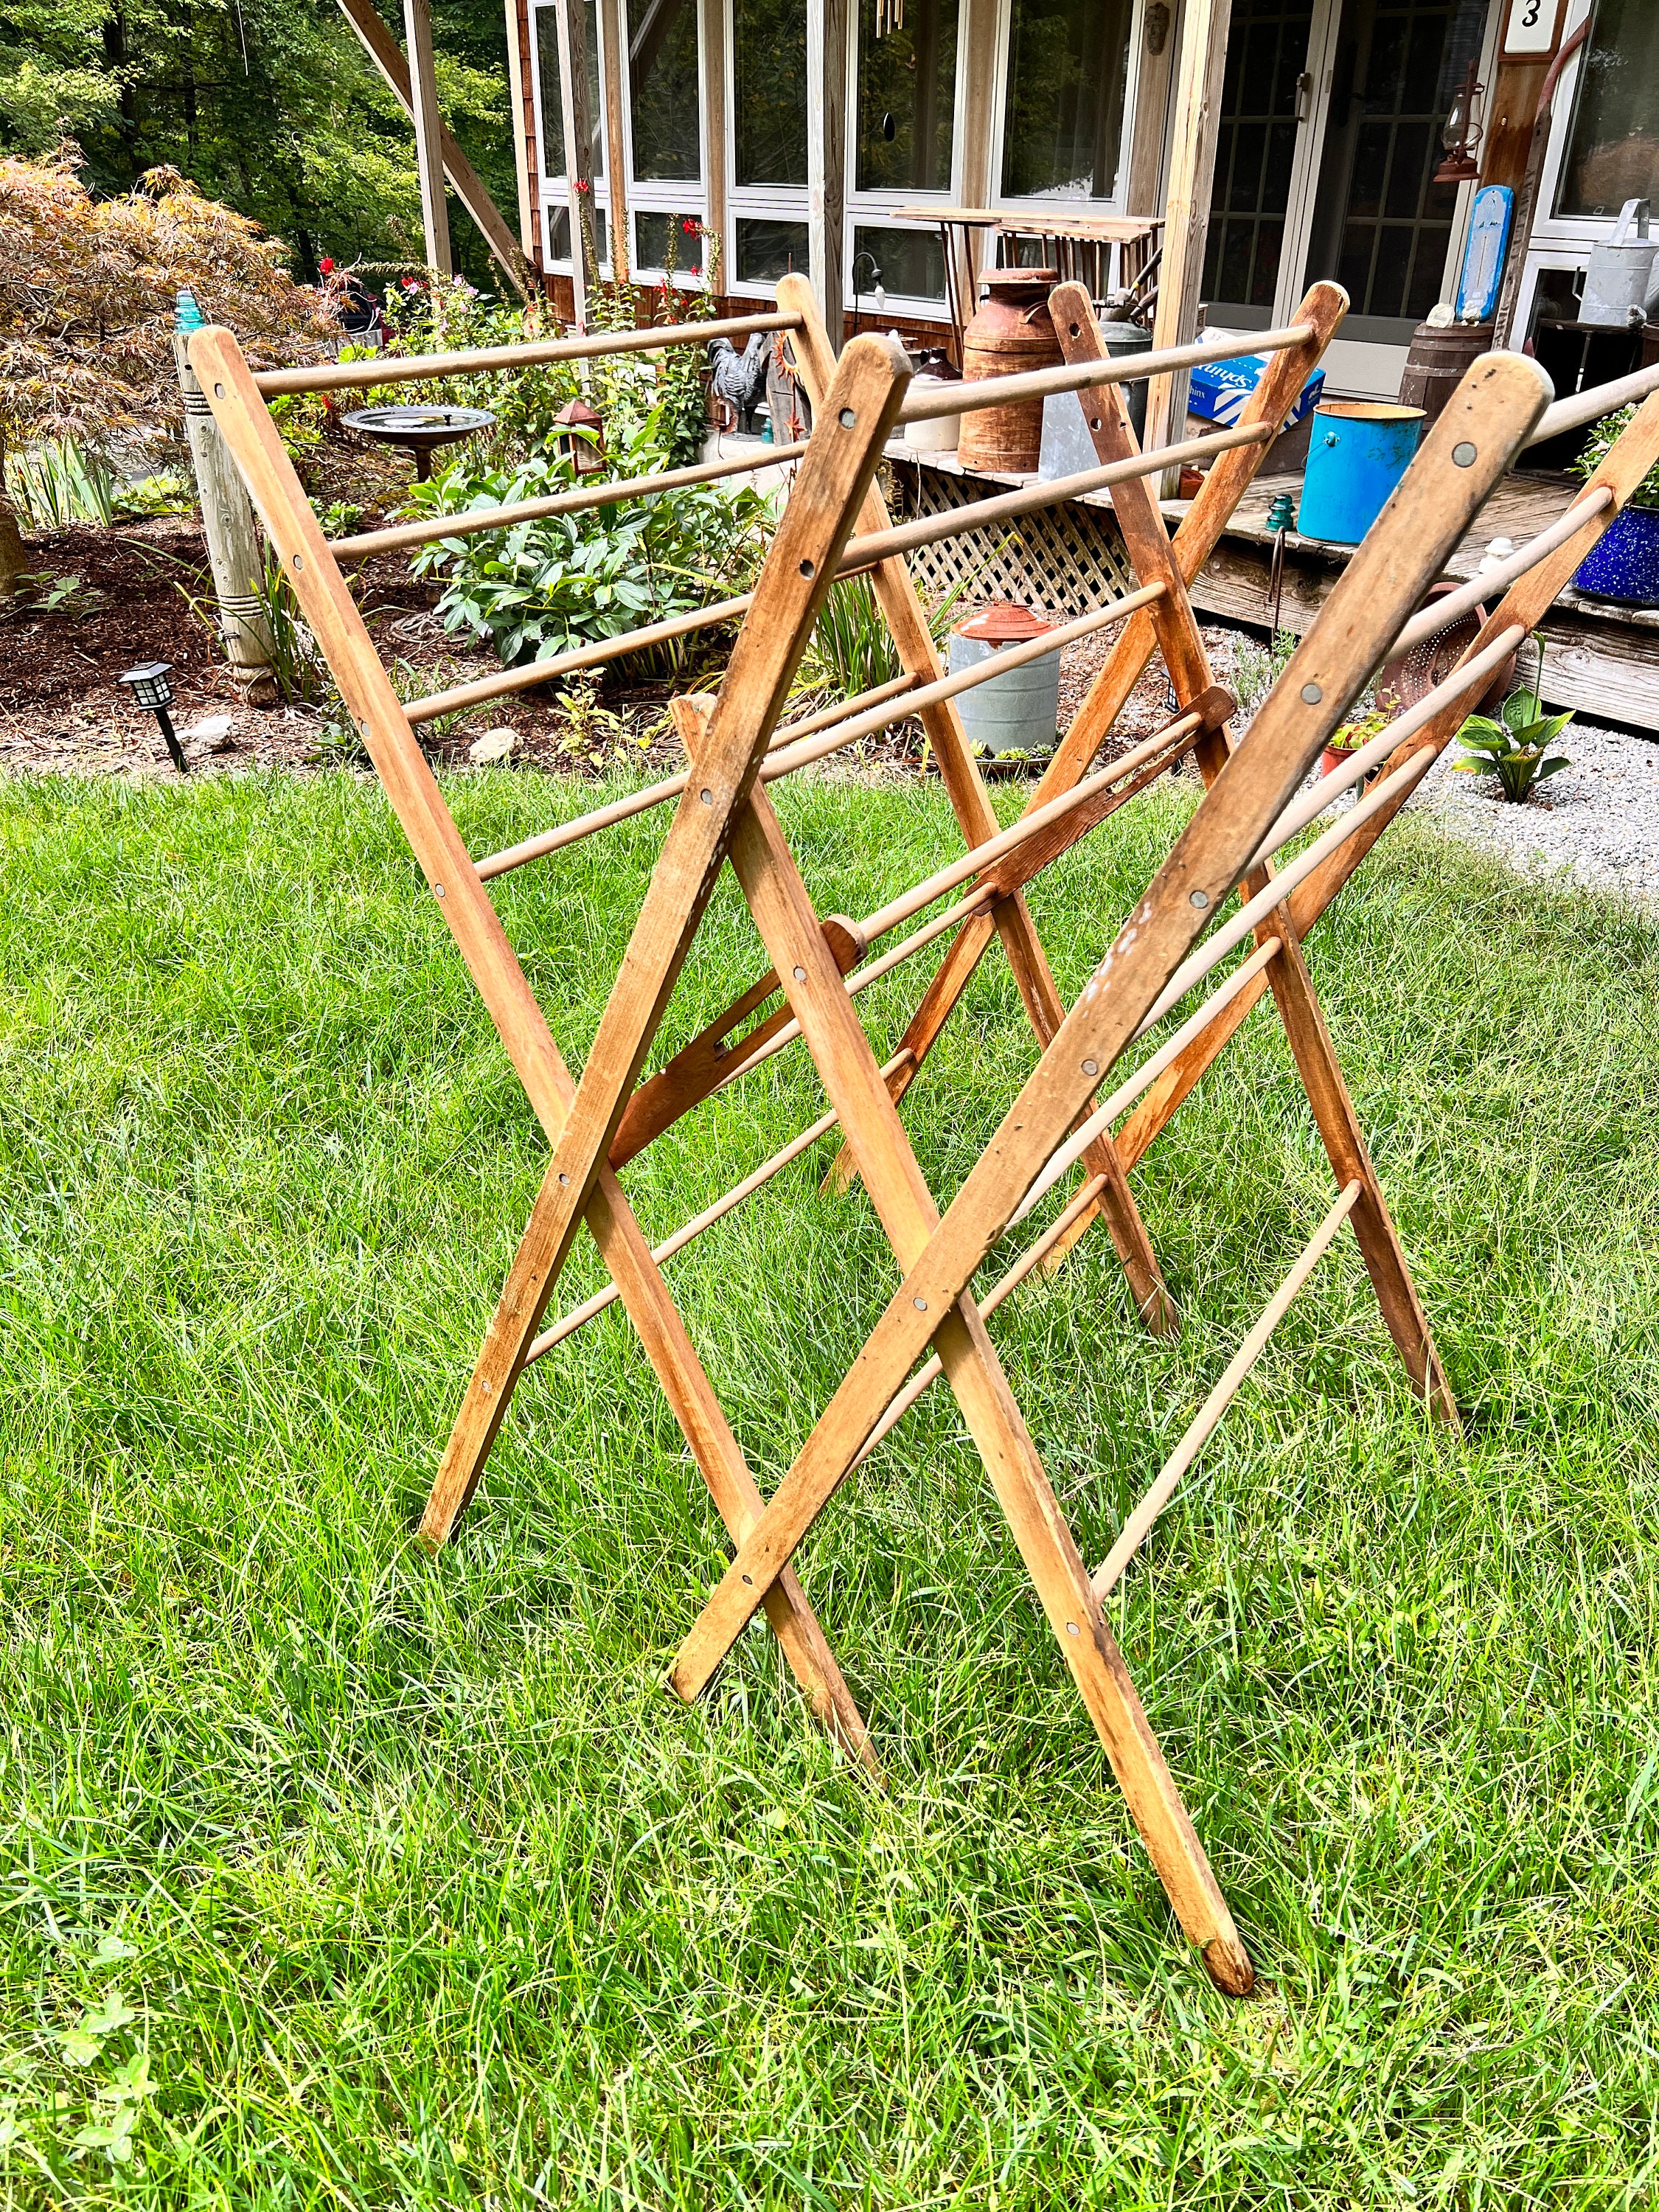 Wooden Clothes Drying Rack – The Foxes Den